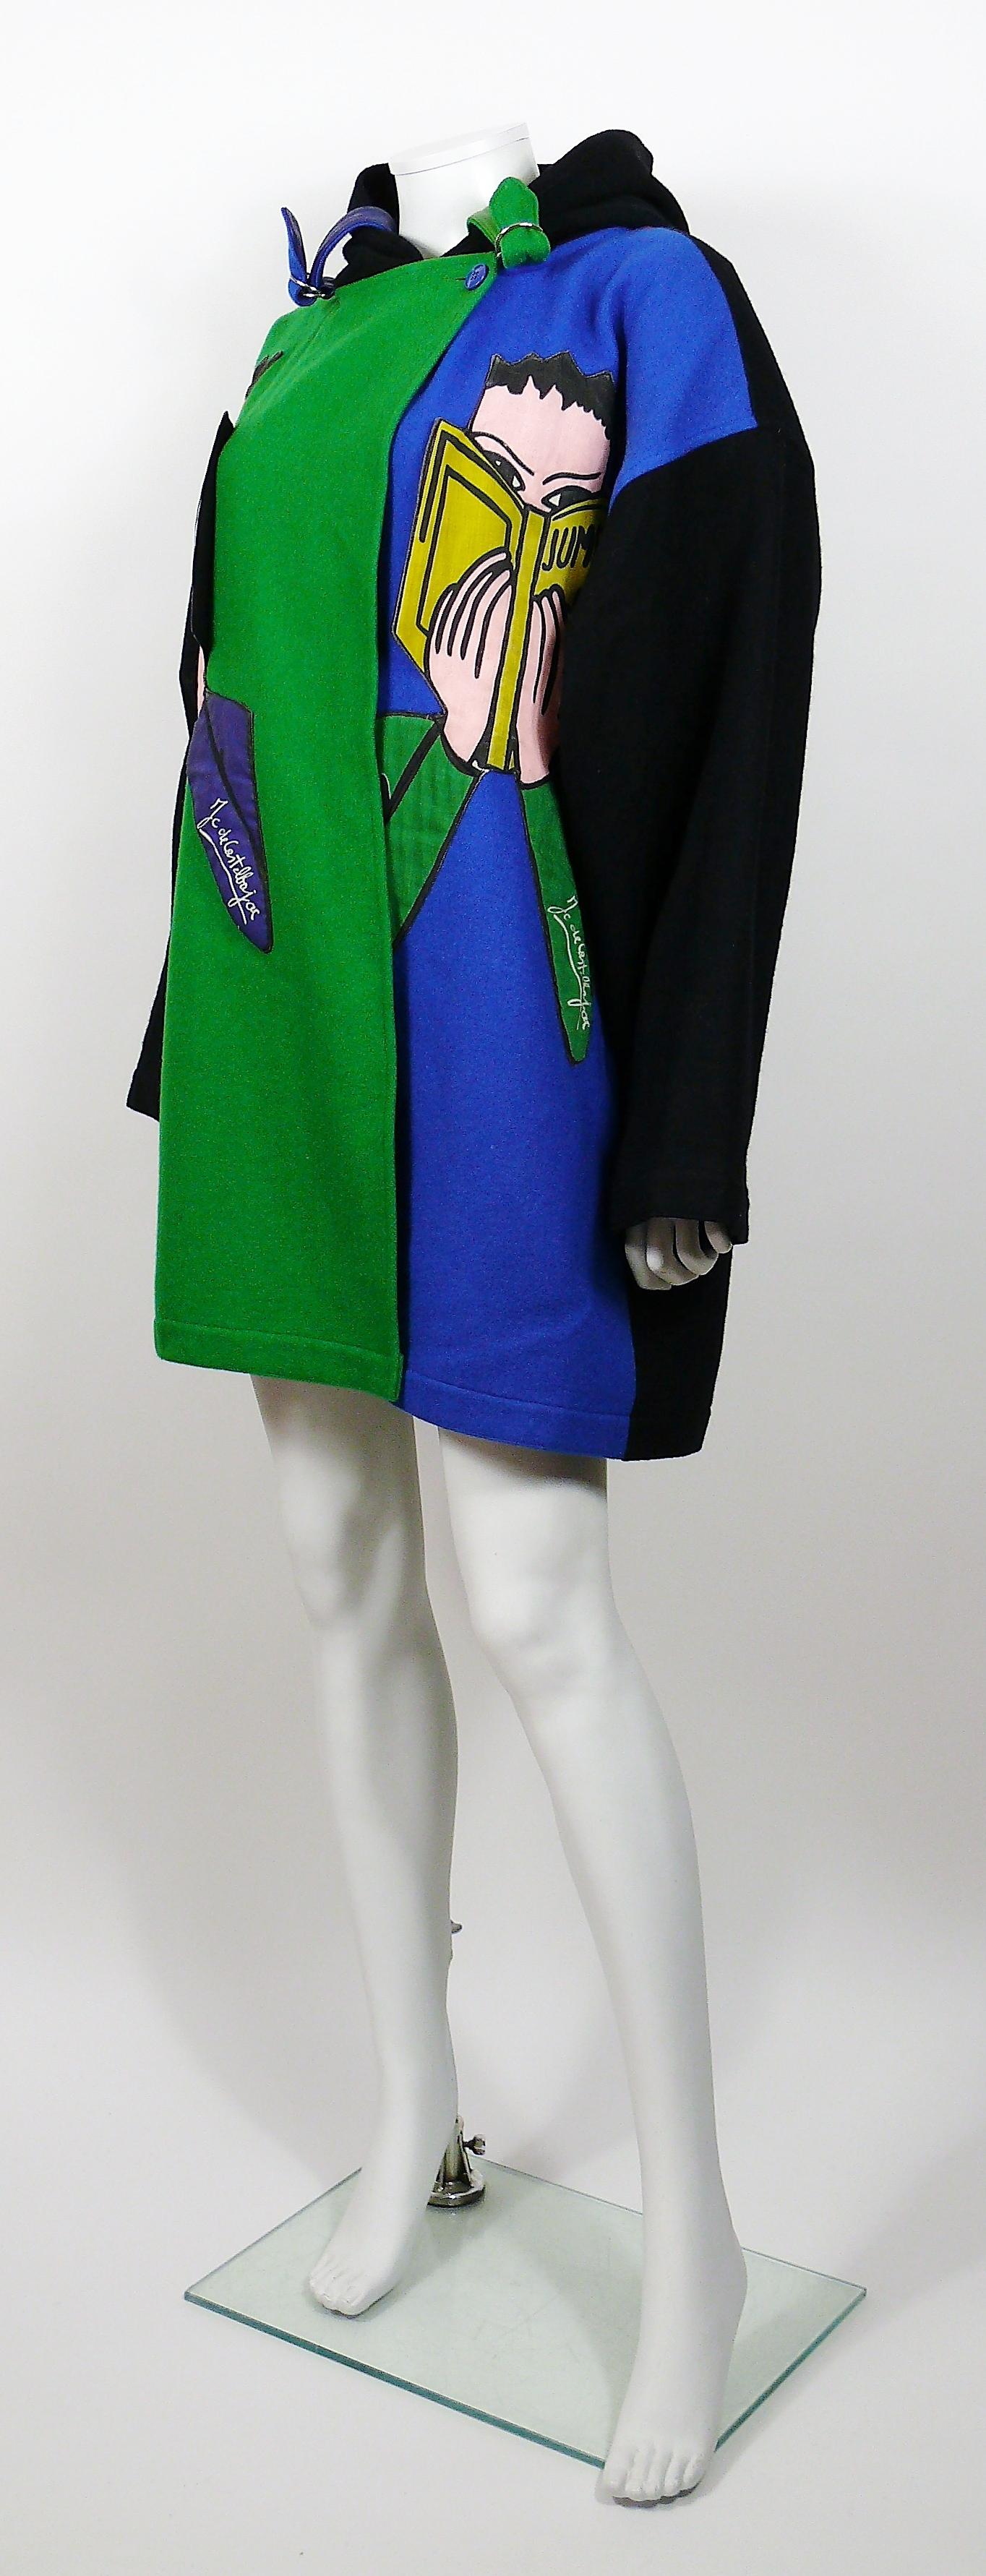 Jean Charles de Castelbajac Ko and Co Vintage Jumeaux Applique Novelty Coat In Good Condition For Sale In Nice, FR